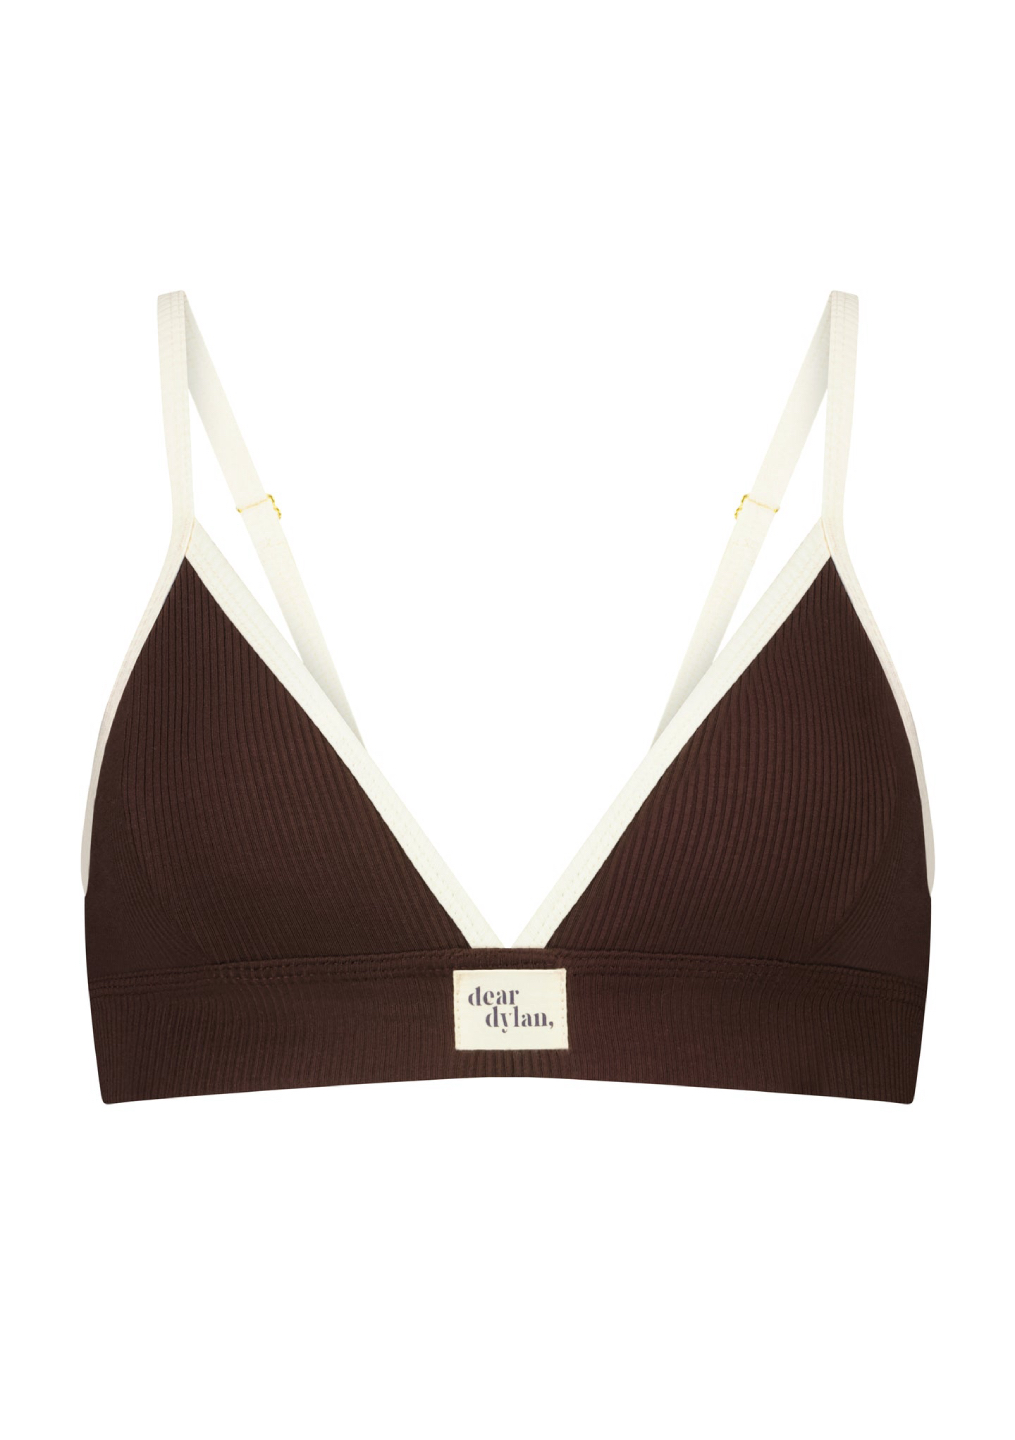 Dear Dylan  Ribbed Bralette - Cocoa - Contain Boutique